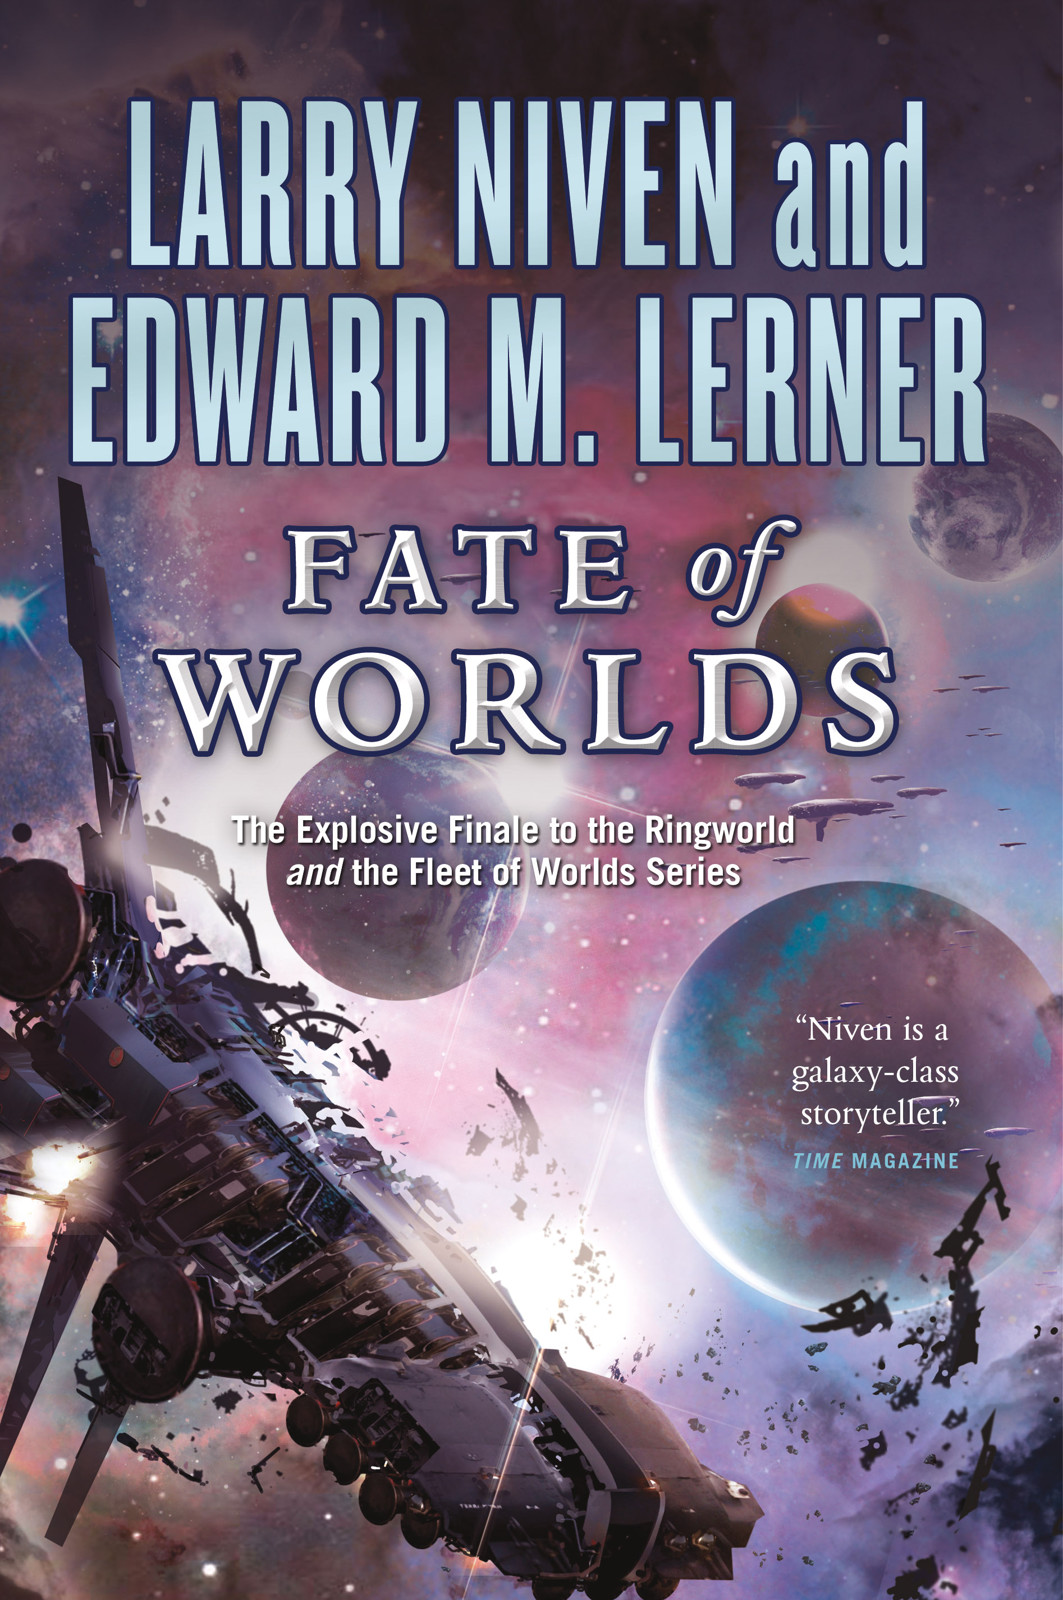 Larry Niven: Fate of Worlds (2012, Tor)